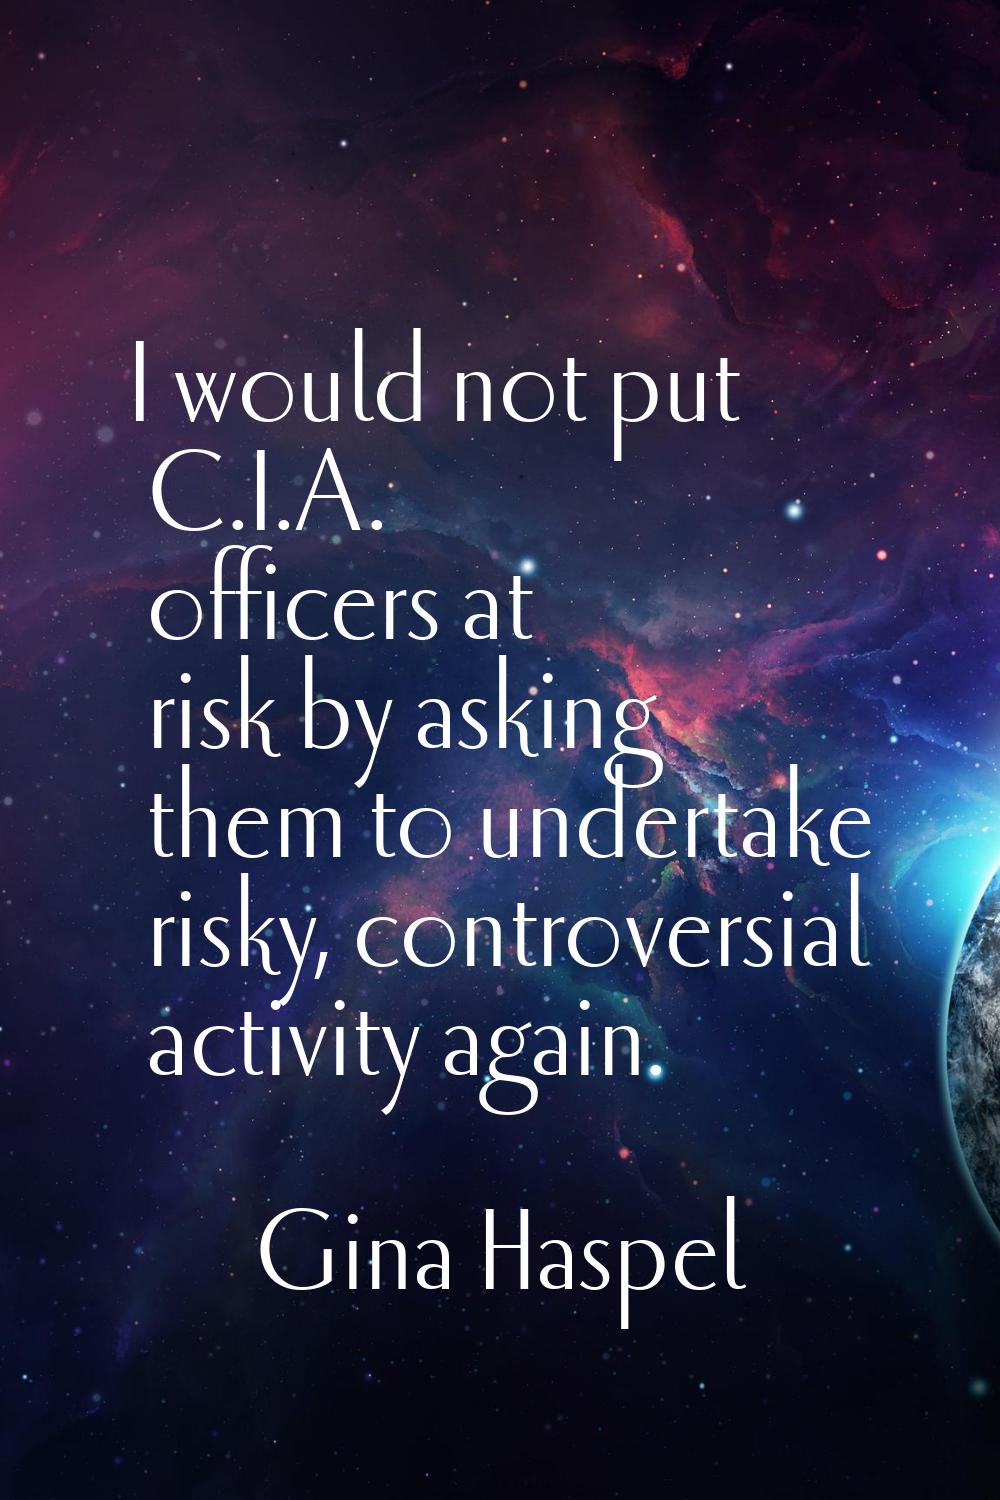 I would not put C.I.A. officers at risk by asking them to undertake risky, controversial activity a